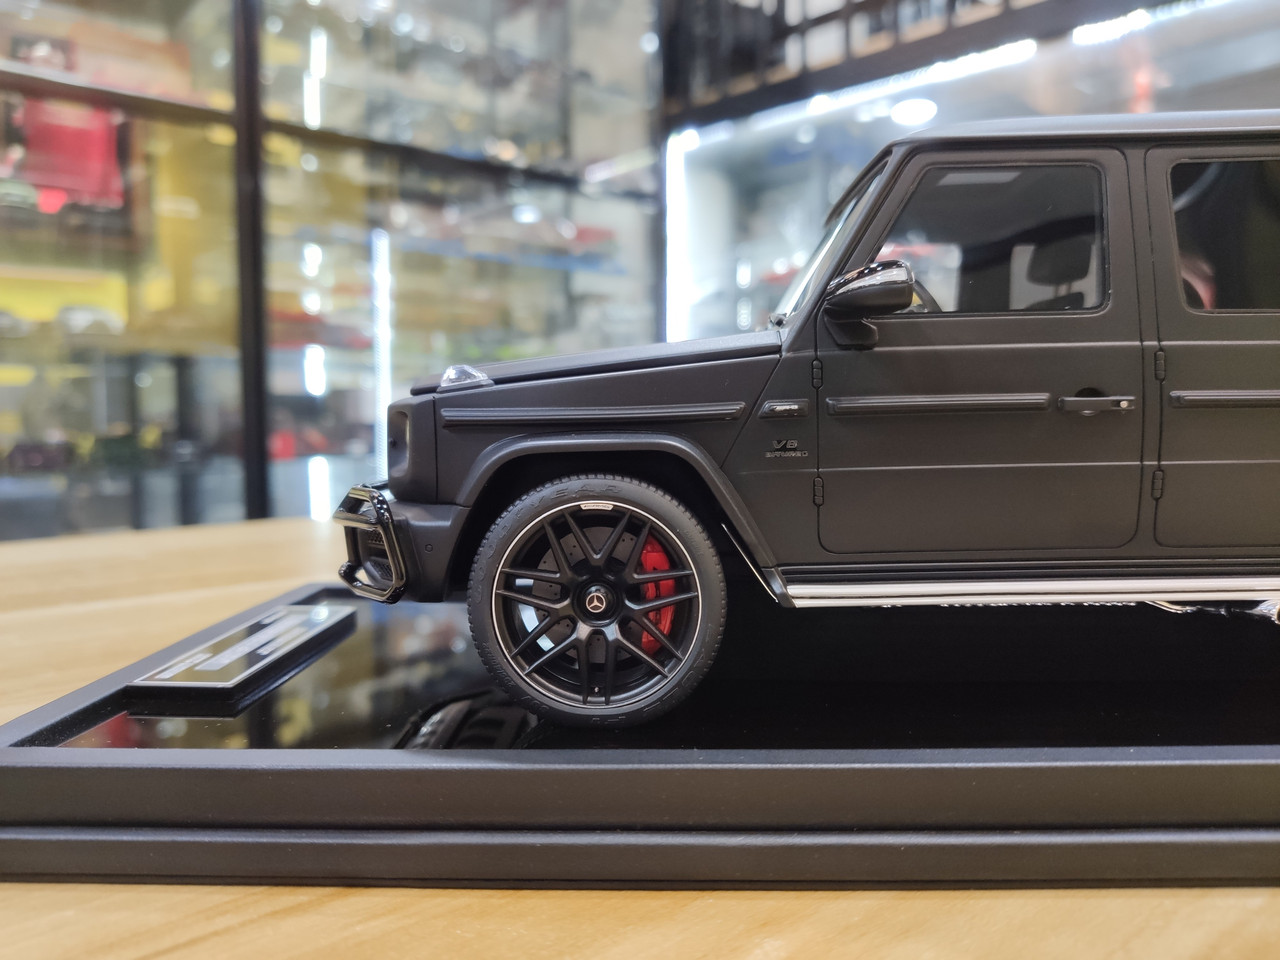 1/18 MH Motorhelix Mercedes-Benz Mercedes G63 AMG (Matte Black with Red Calipers) Resin Car Model Limited 99 Pieces